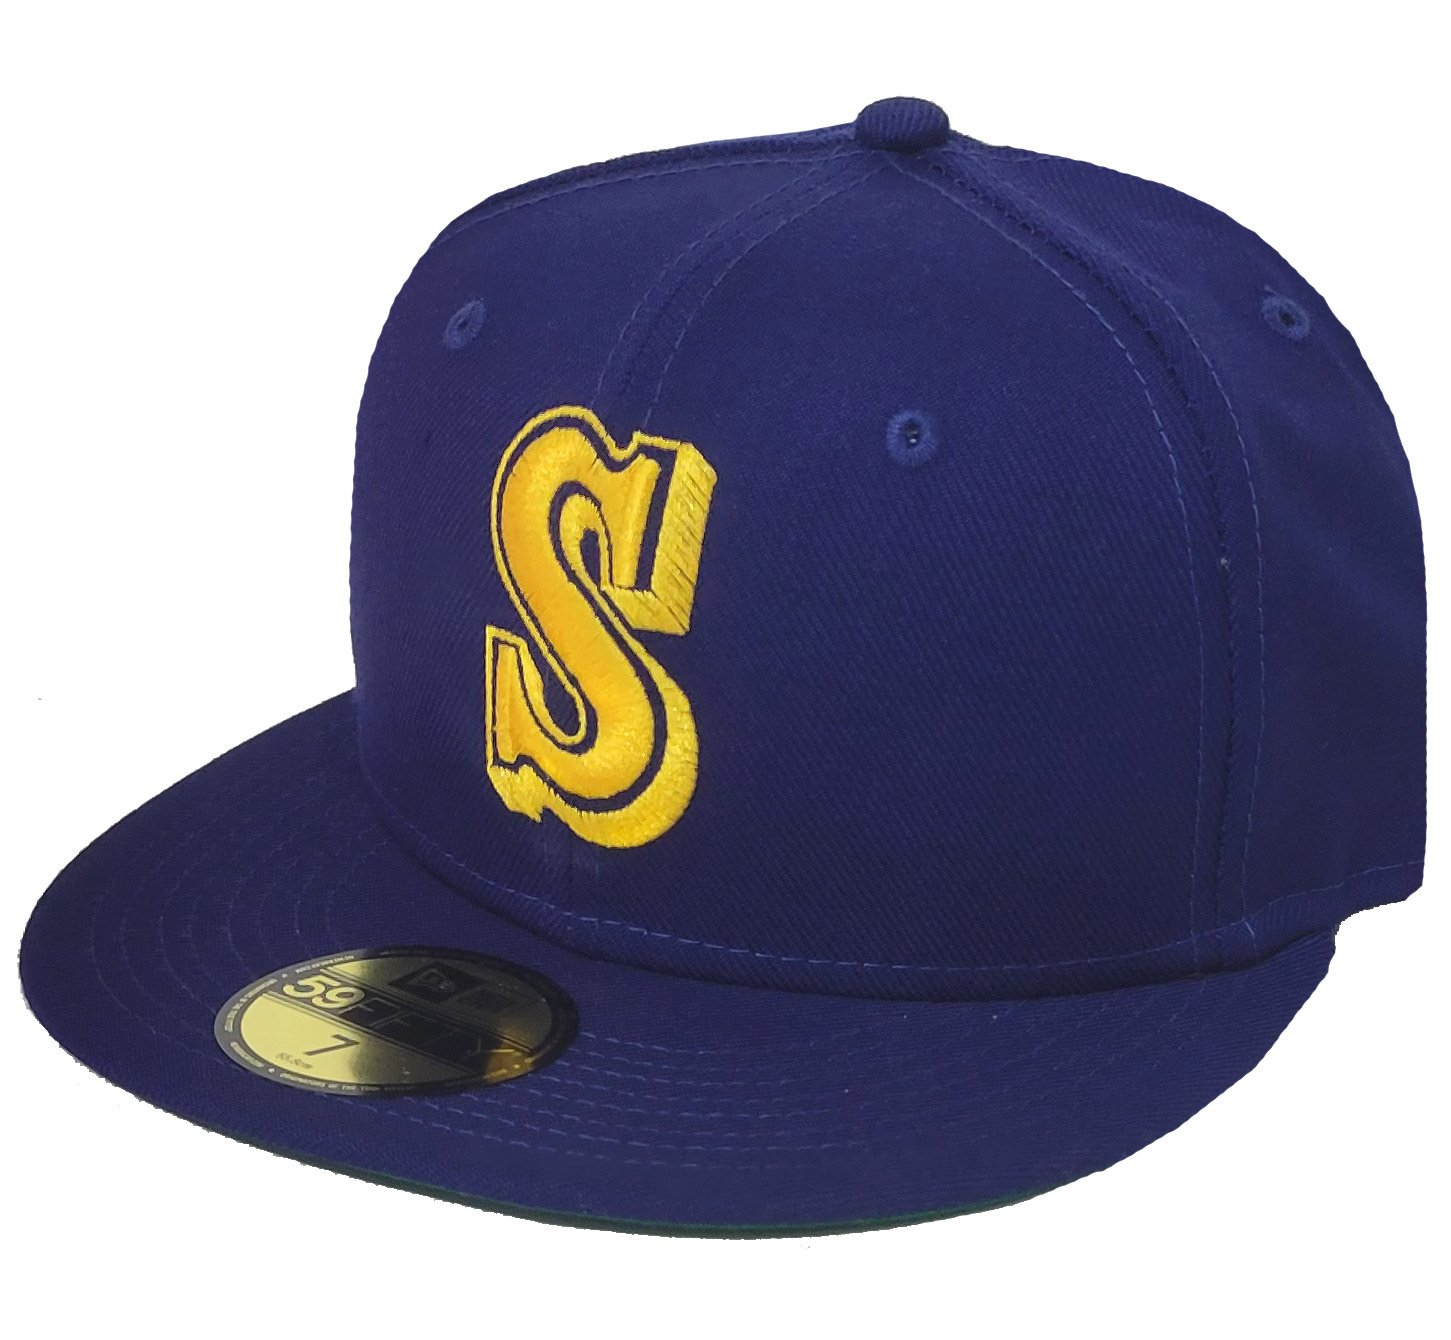 Official Seattle Mariners Cooperstown Collection Gear, Vintage